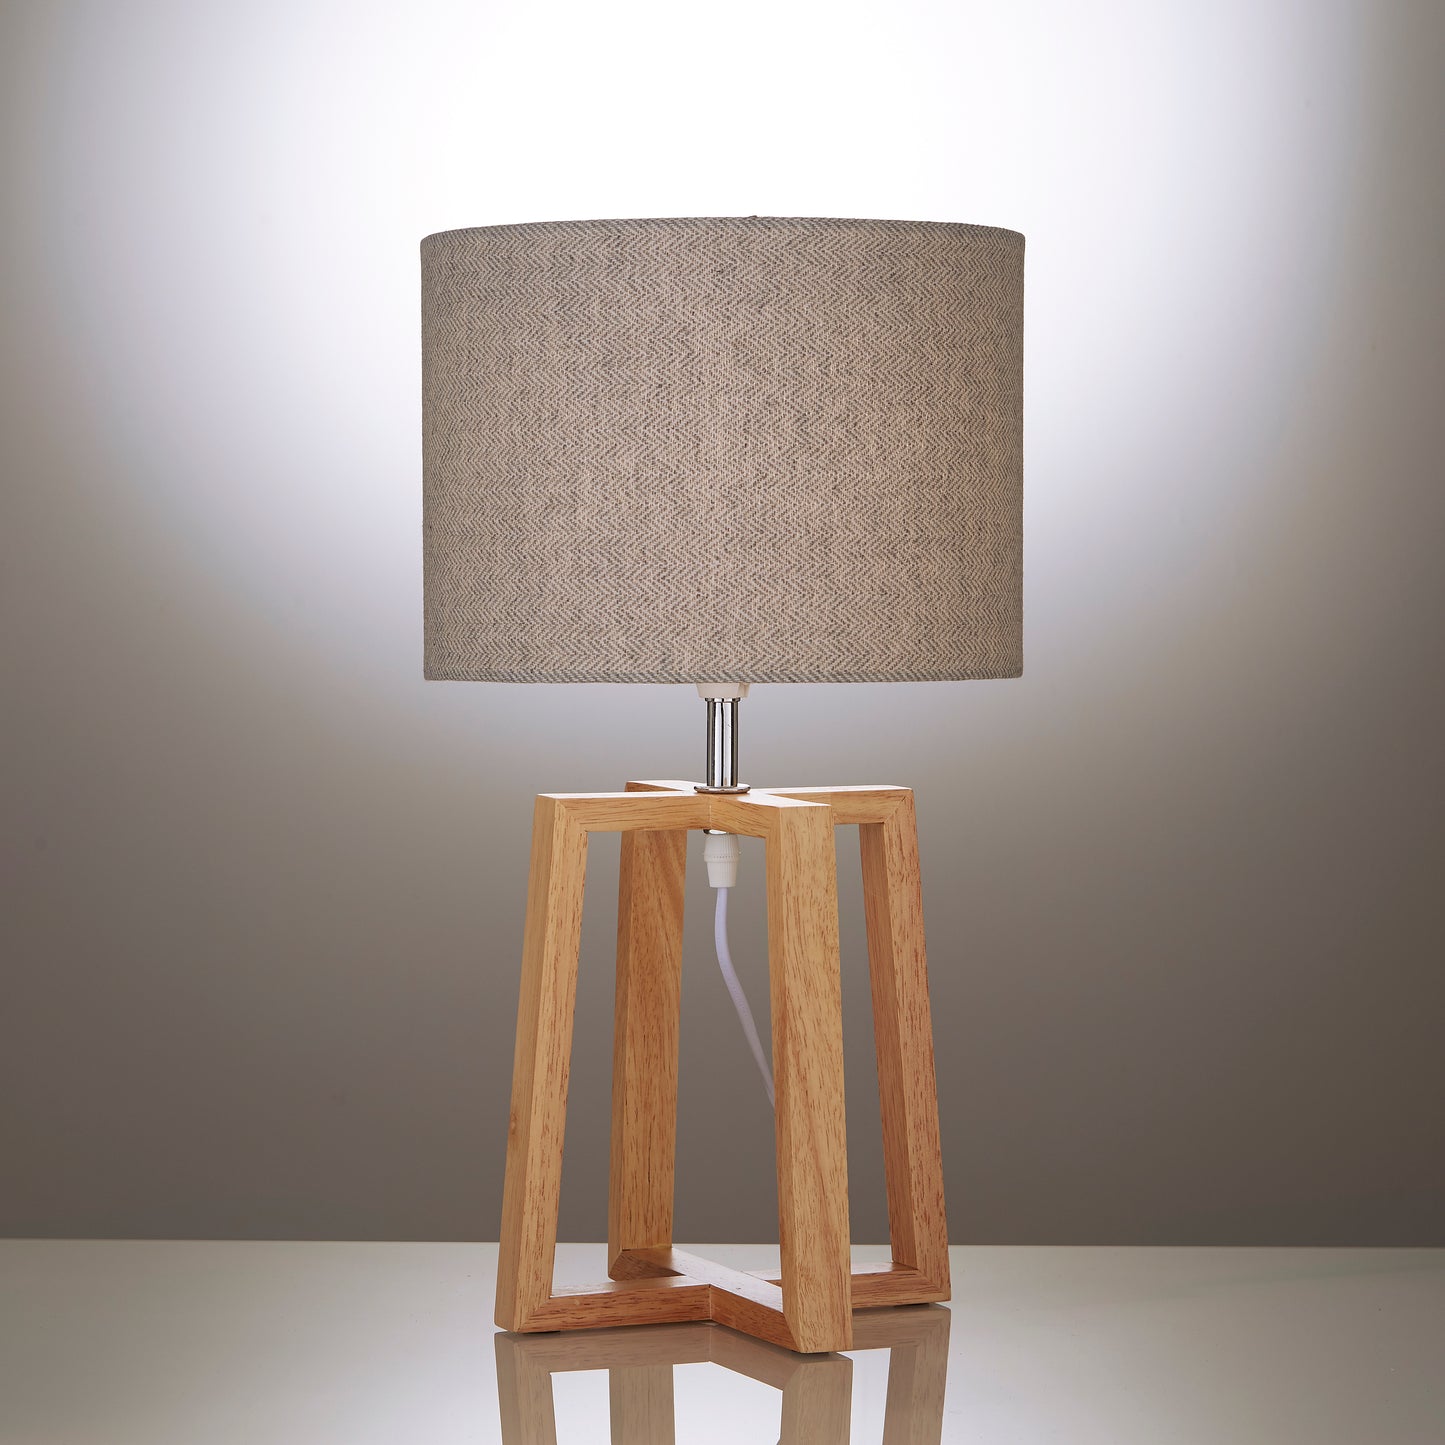 Pair of Natural Wooden Table Lamps with Linen Look Shades Criss Cross Legs